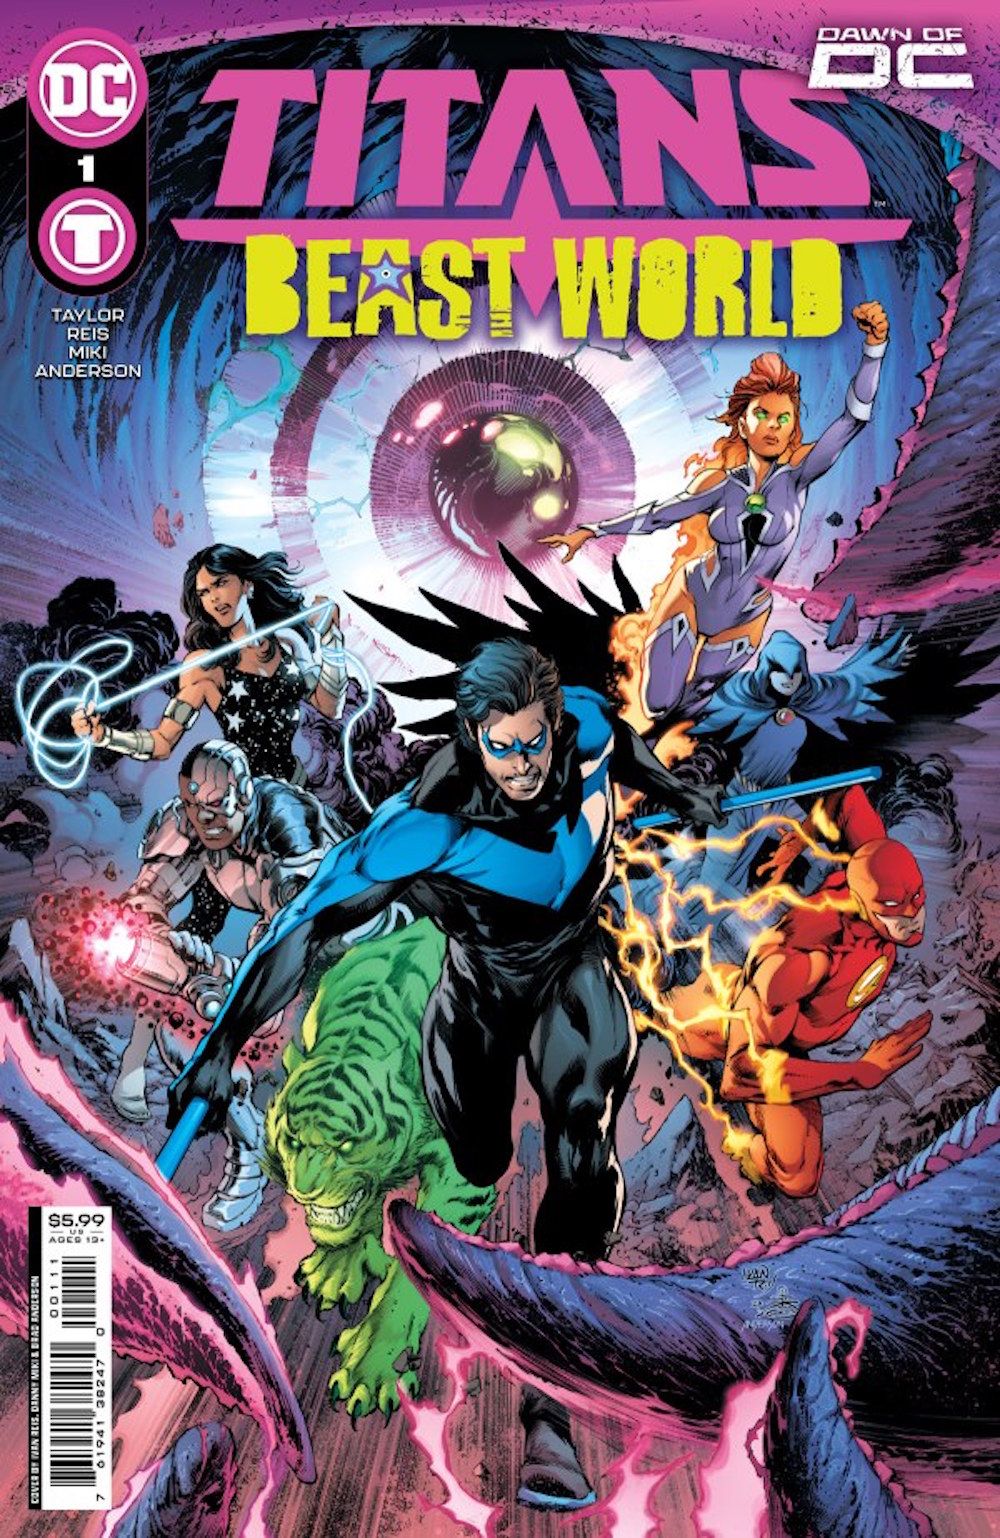 Titans: Beast World #1 cover showing the Titans rushing in as Necrostar's eye watches ominously.